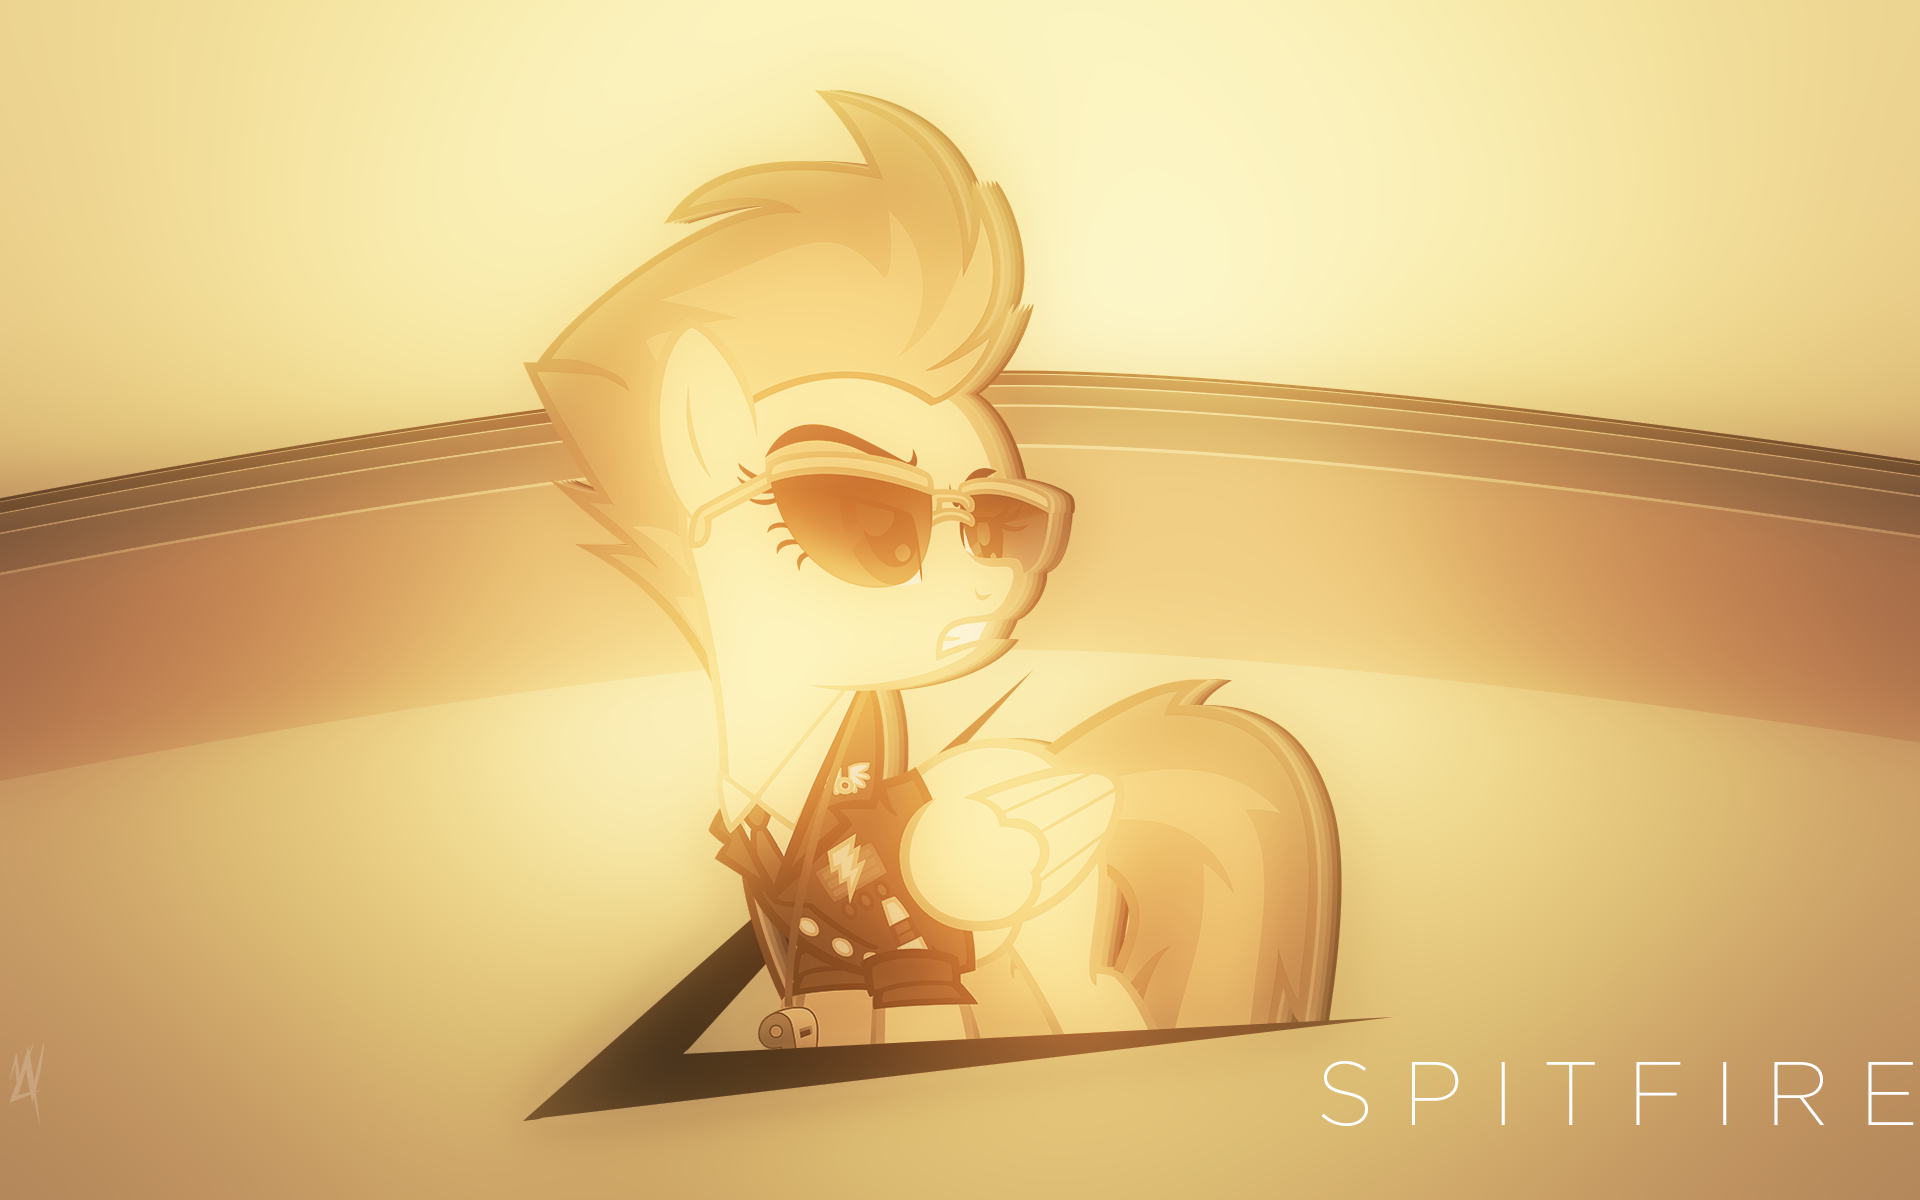 Spitfire by caffeinejunkie and MyLittleVisuals